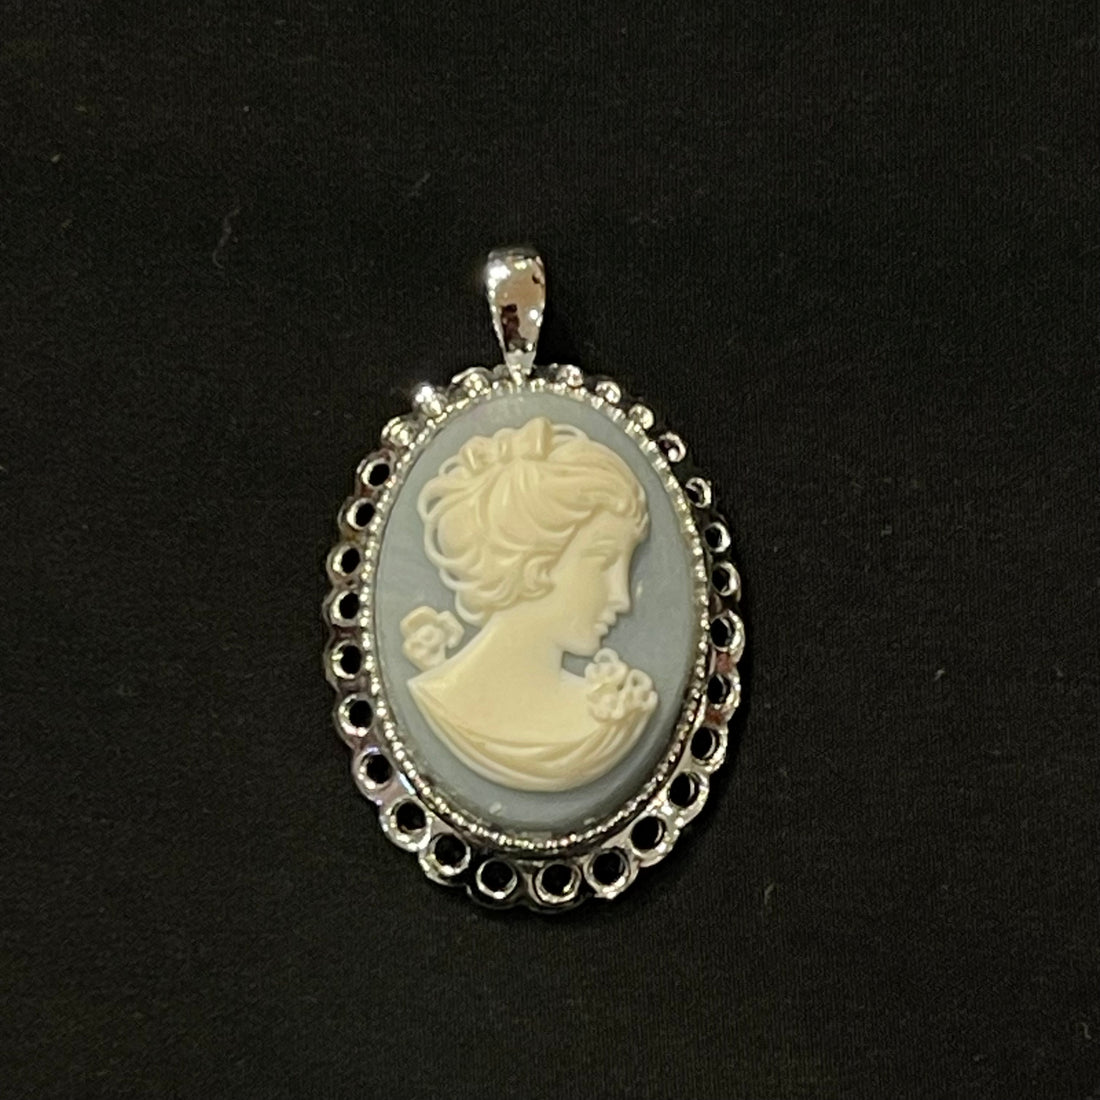 Blue and White Oval Cameo Pendant with Silver Trim